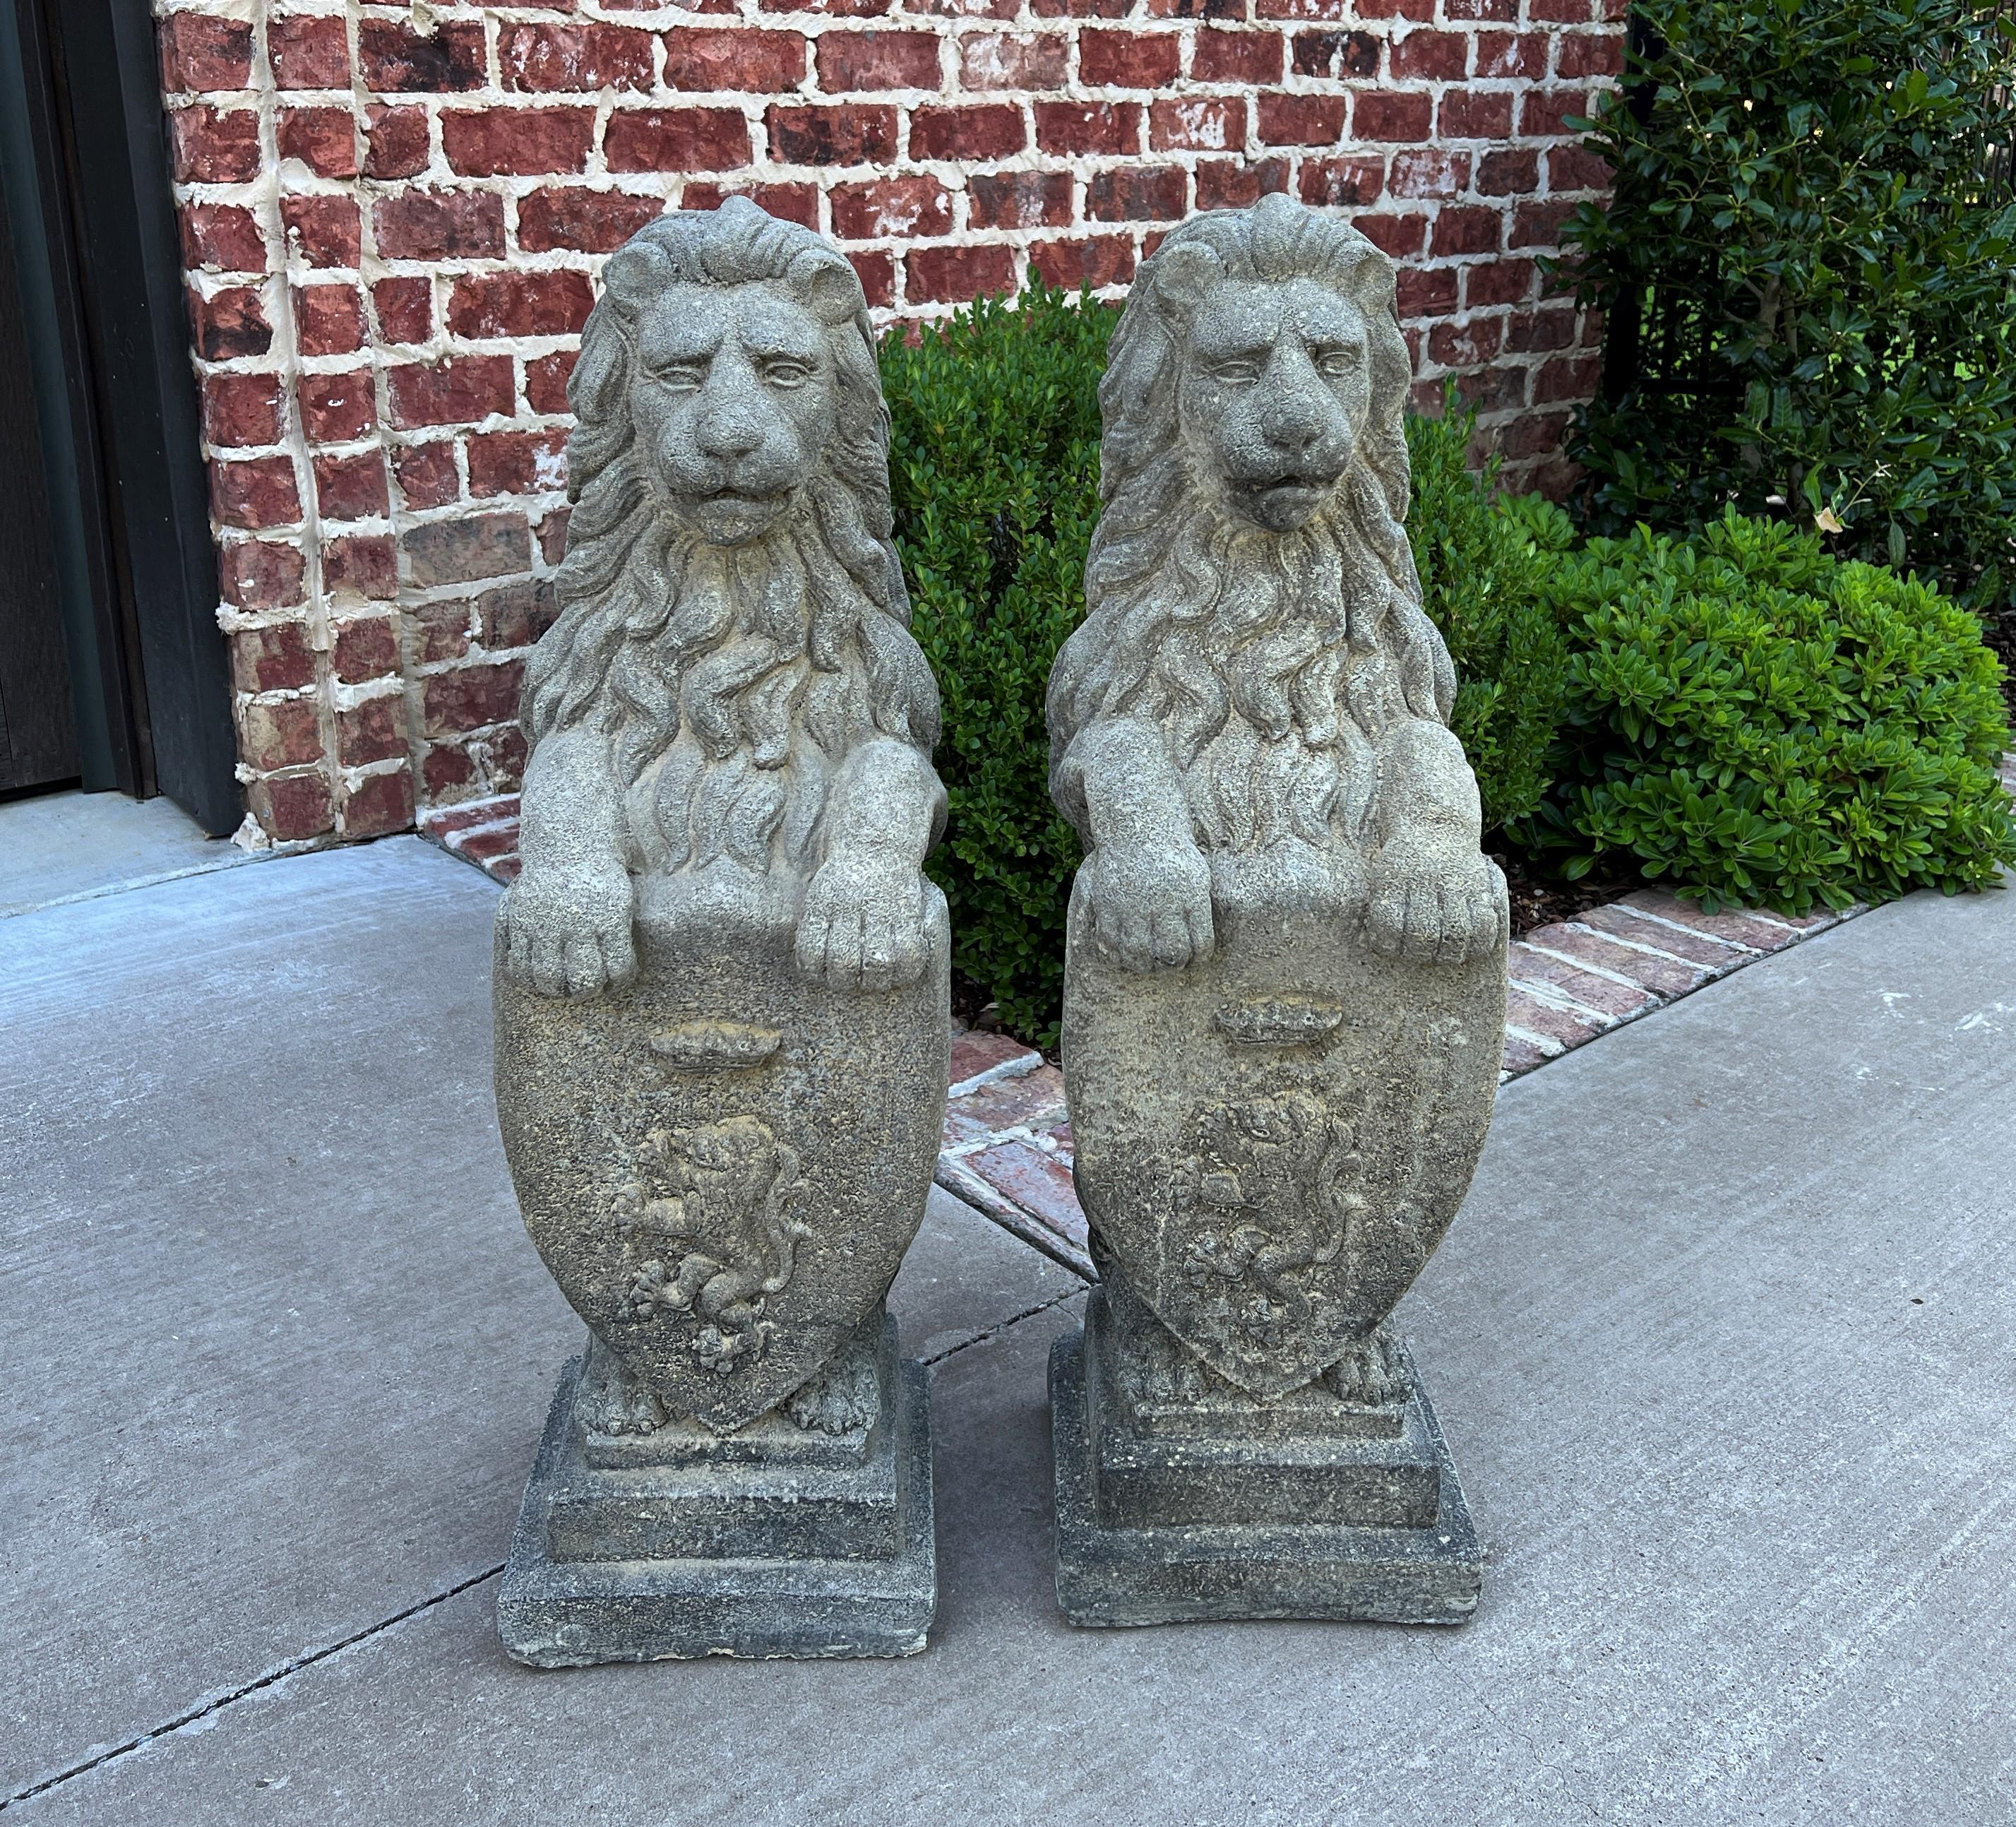 Vintage pair English cast stone lions with Heraldic shield statues~~Garden Figures~~Statuary~~Architectural Yard Decor

Original aged patina

 The perfect accent piece or focal point in an entryway, garden, yard, flower bed, or sunroom 

 Each